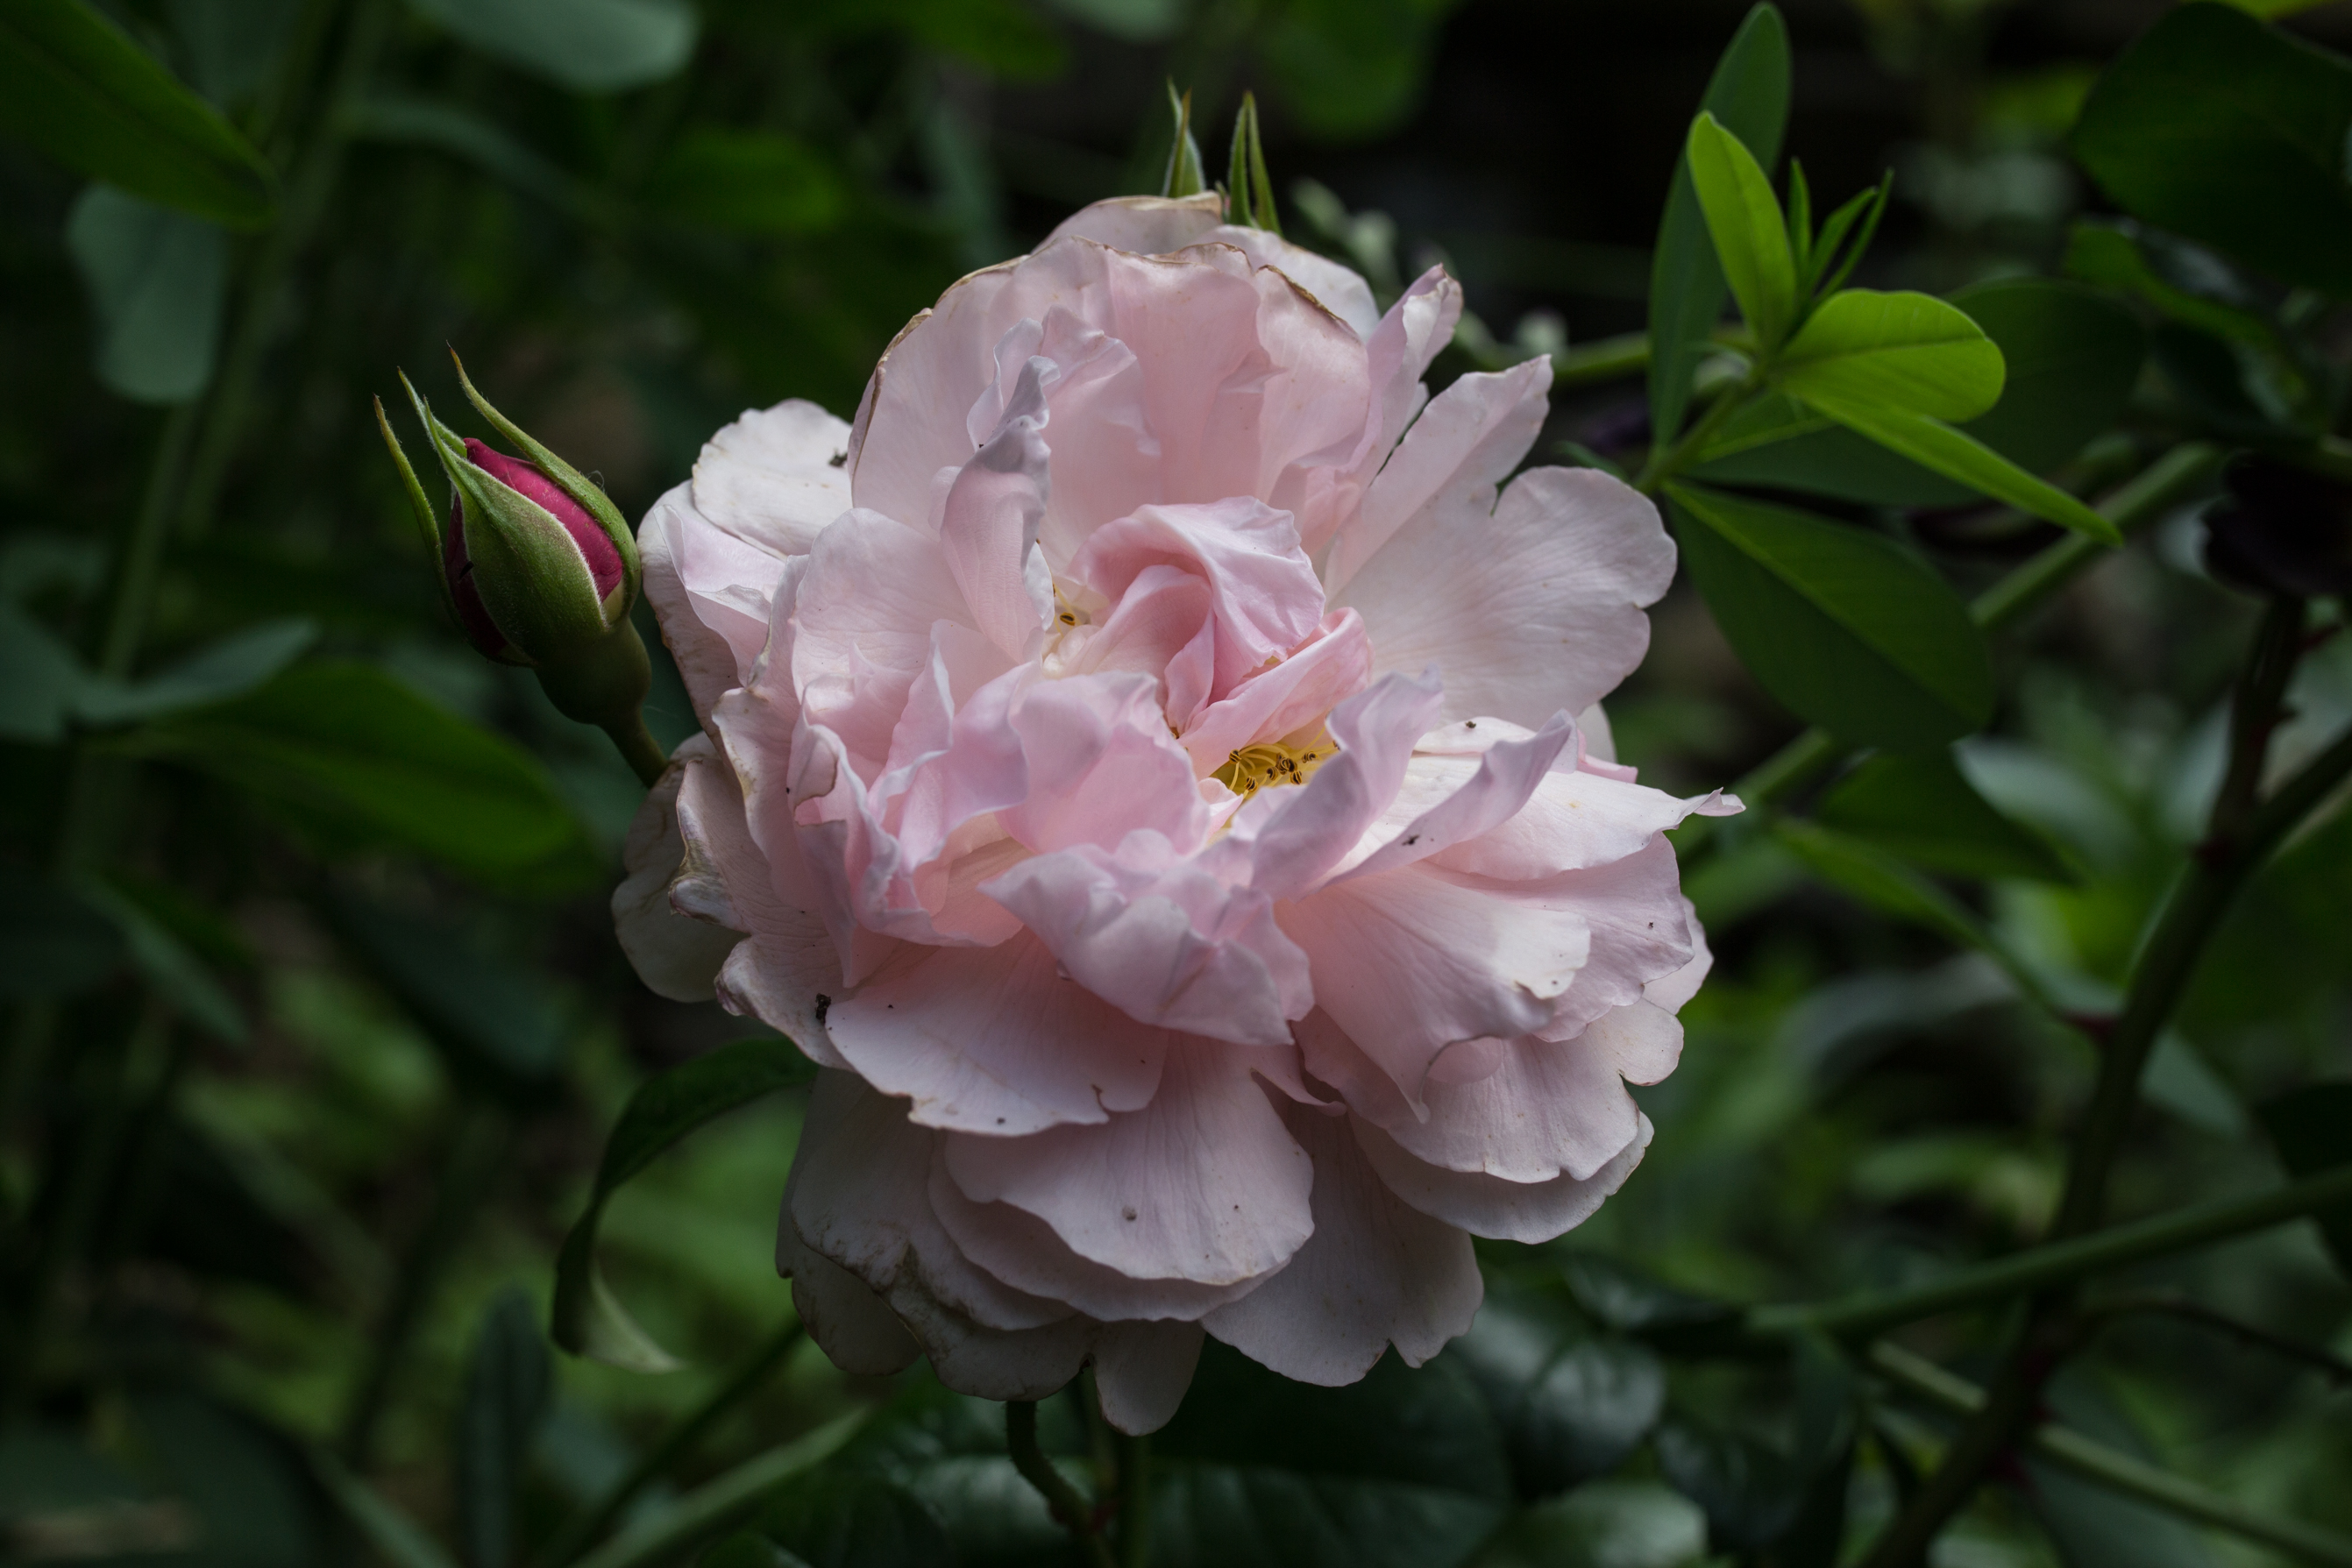 photo of single pink rose from the garden of floral designer and artist Gloria B. Collins